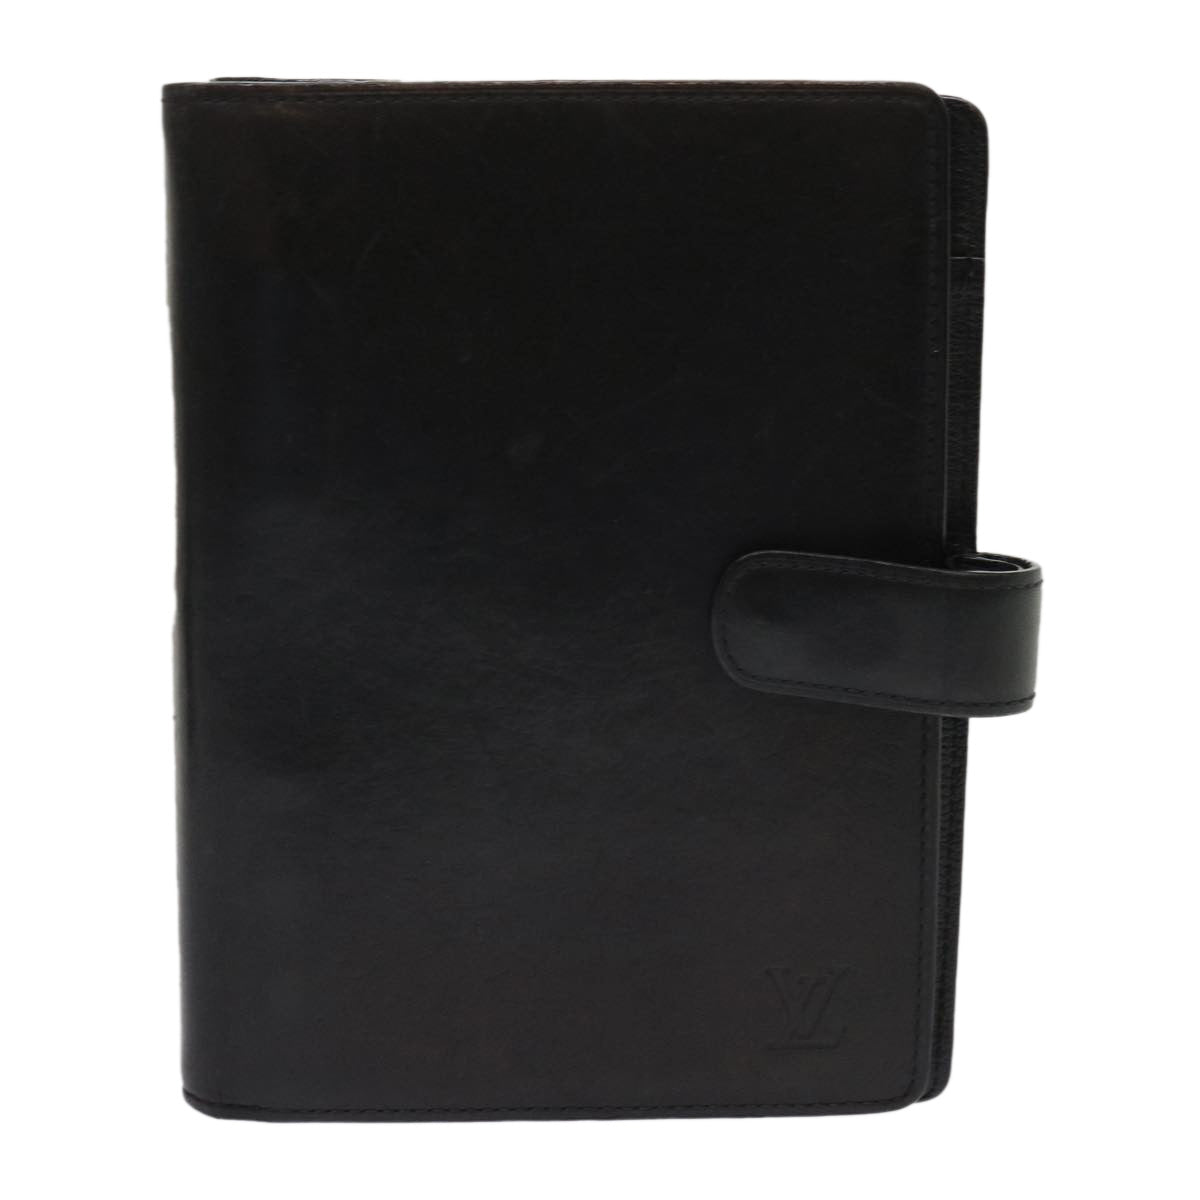 LOUIS VUITTON Nomad Agenda MM Day Planner Cover Black R20478 LV Auth 47243